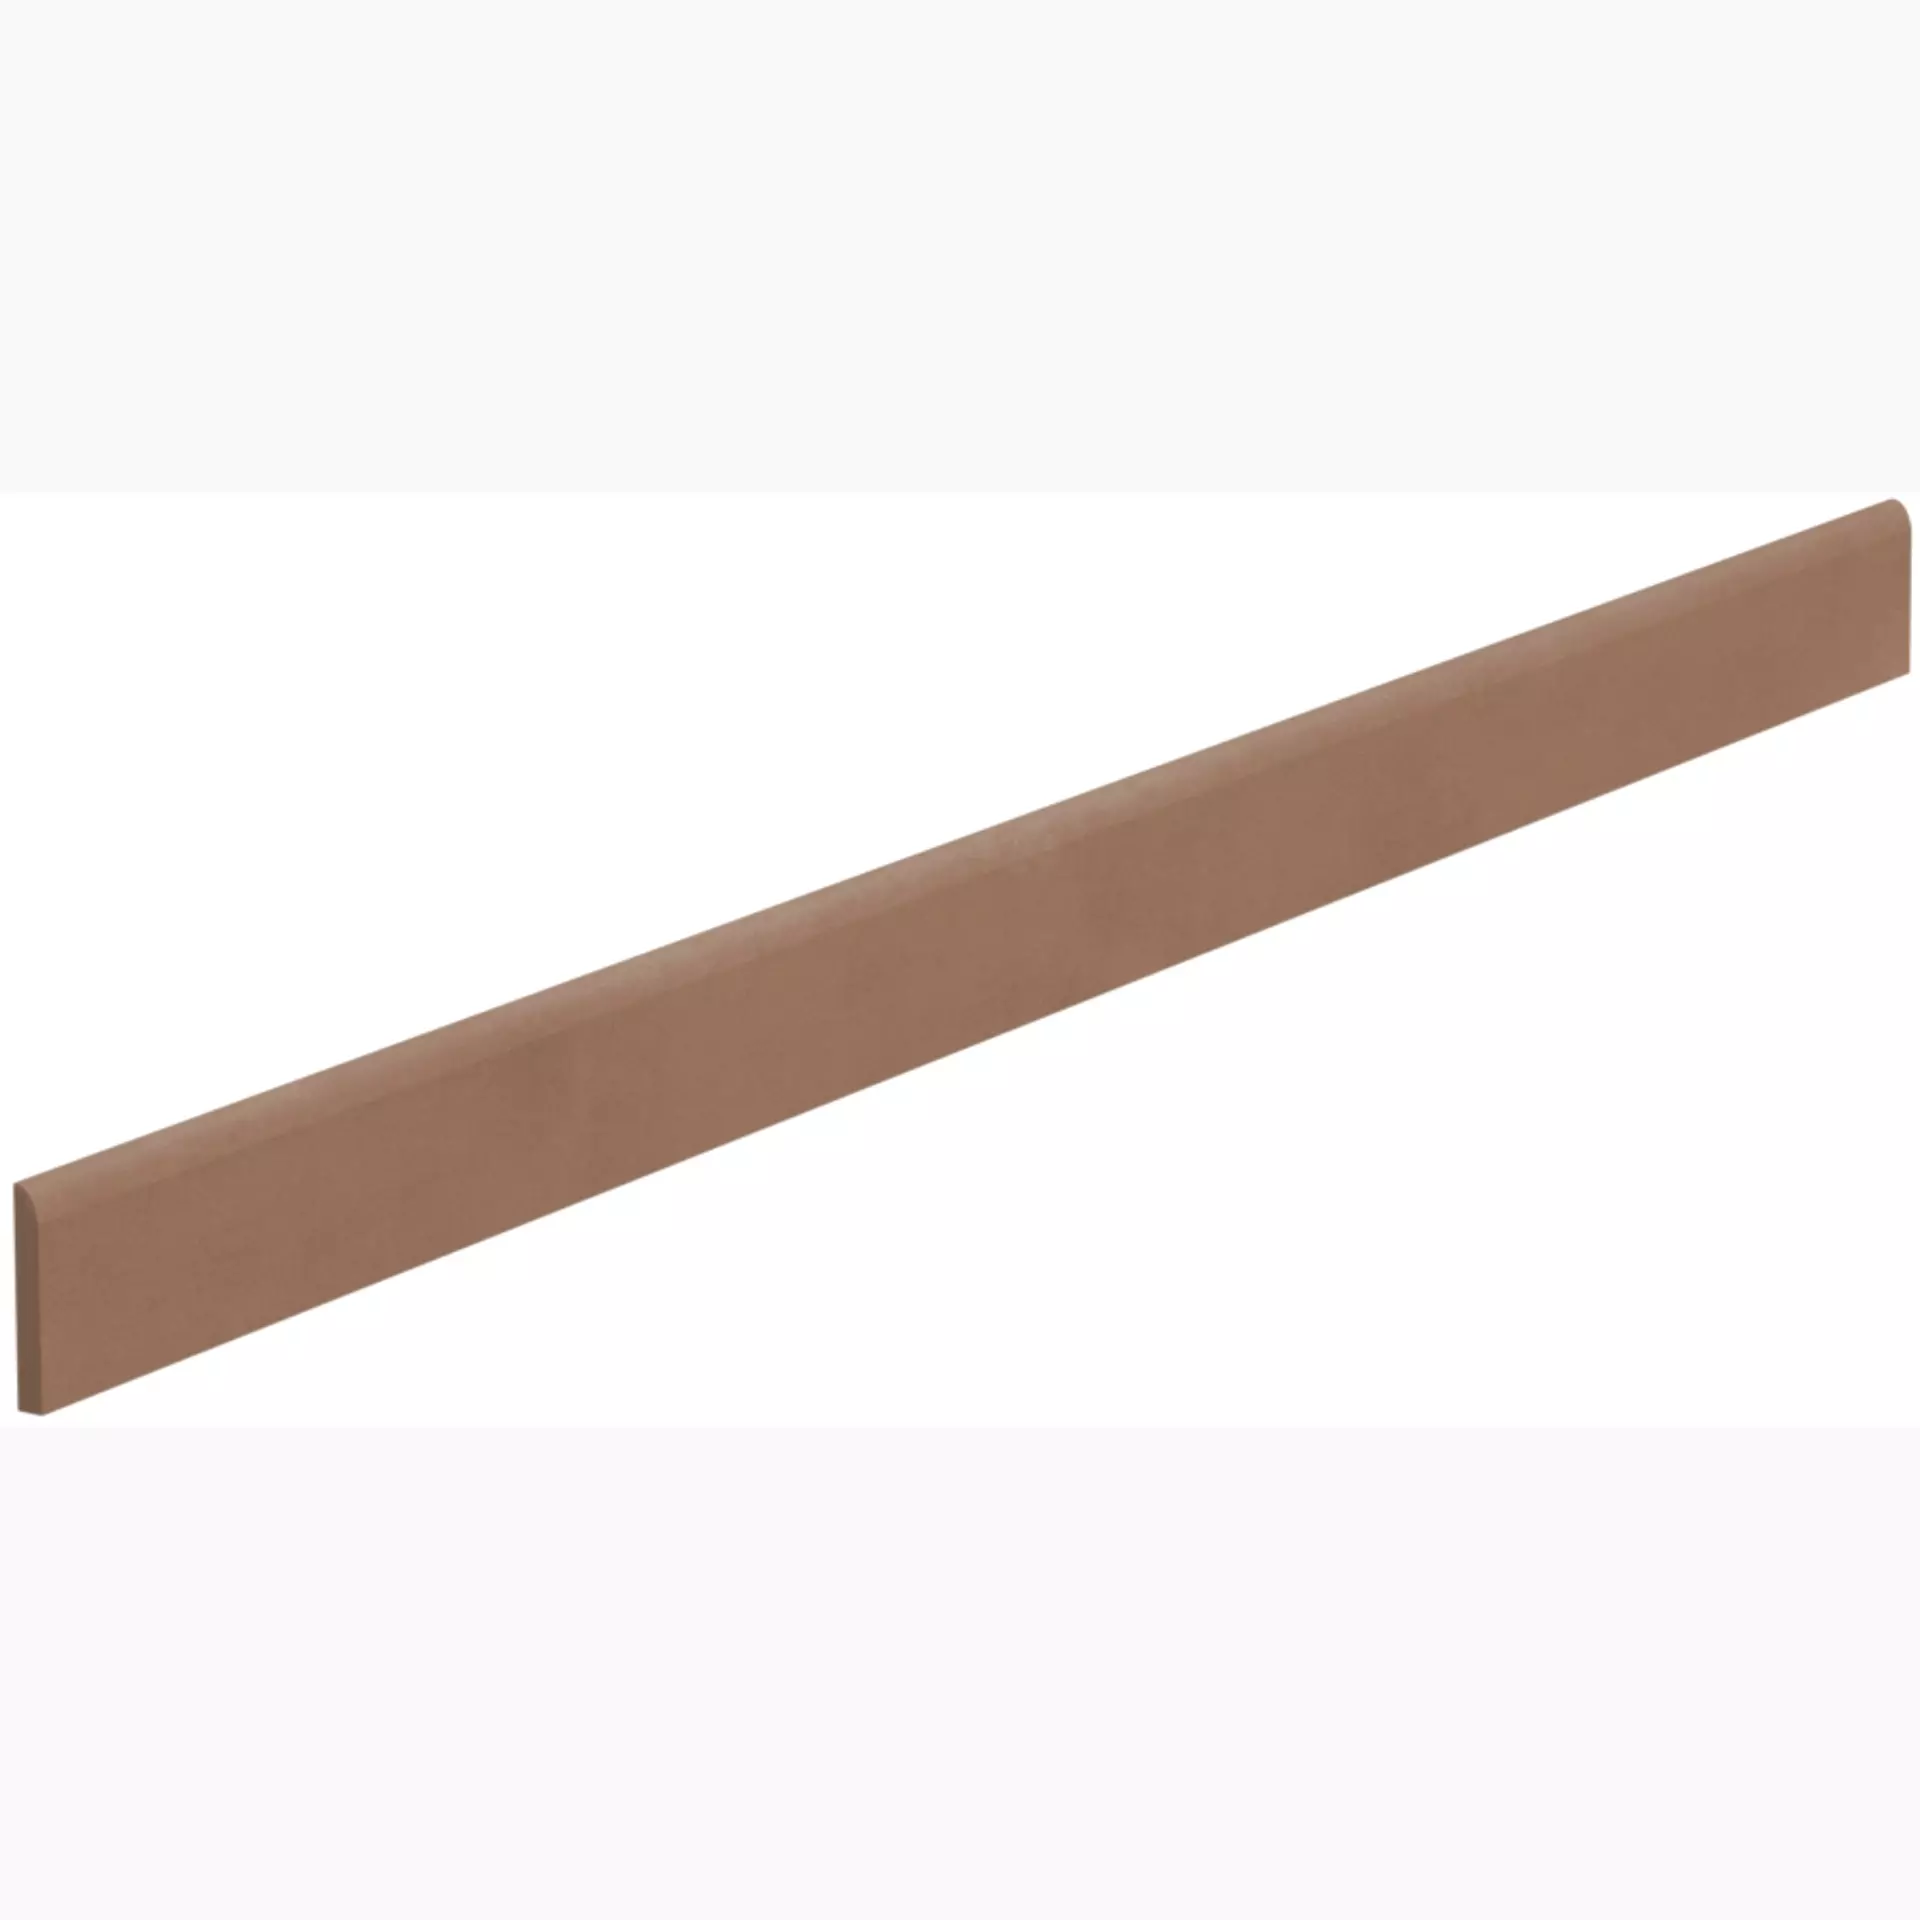 Del Conca Htl Timeline Canyon Htl06 Naturale Skirting board G0TL06R12 7,5x120cm rectified 8,5mm